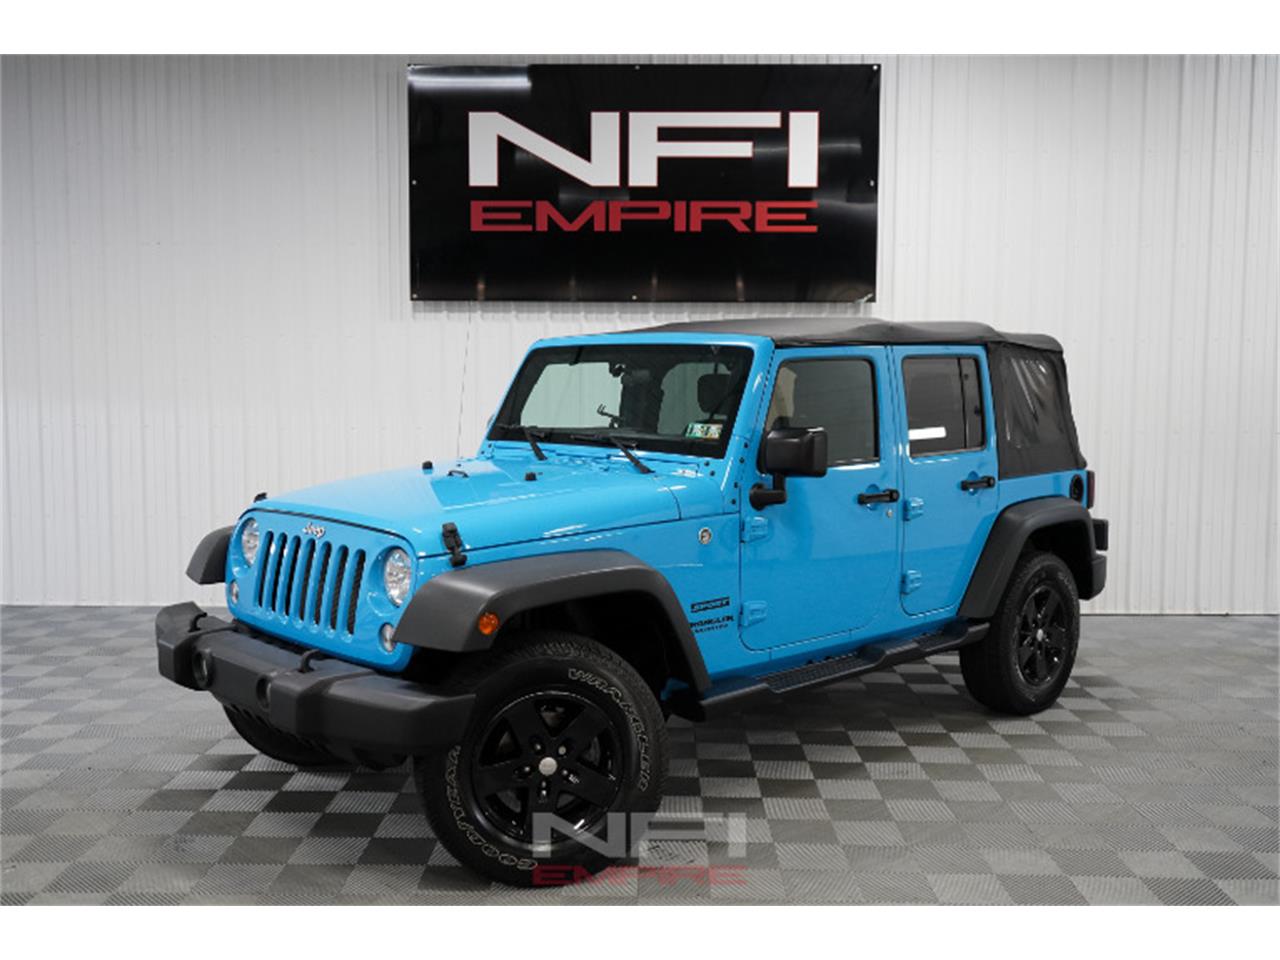 For Sale: 2017 Jeep Wrangler in North East, Pennsylvania for sale in North East, PA